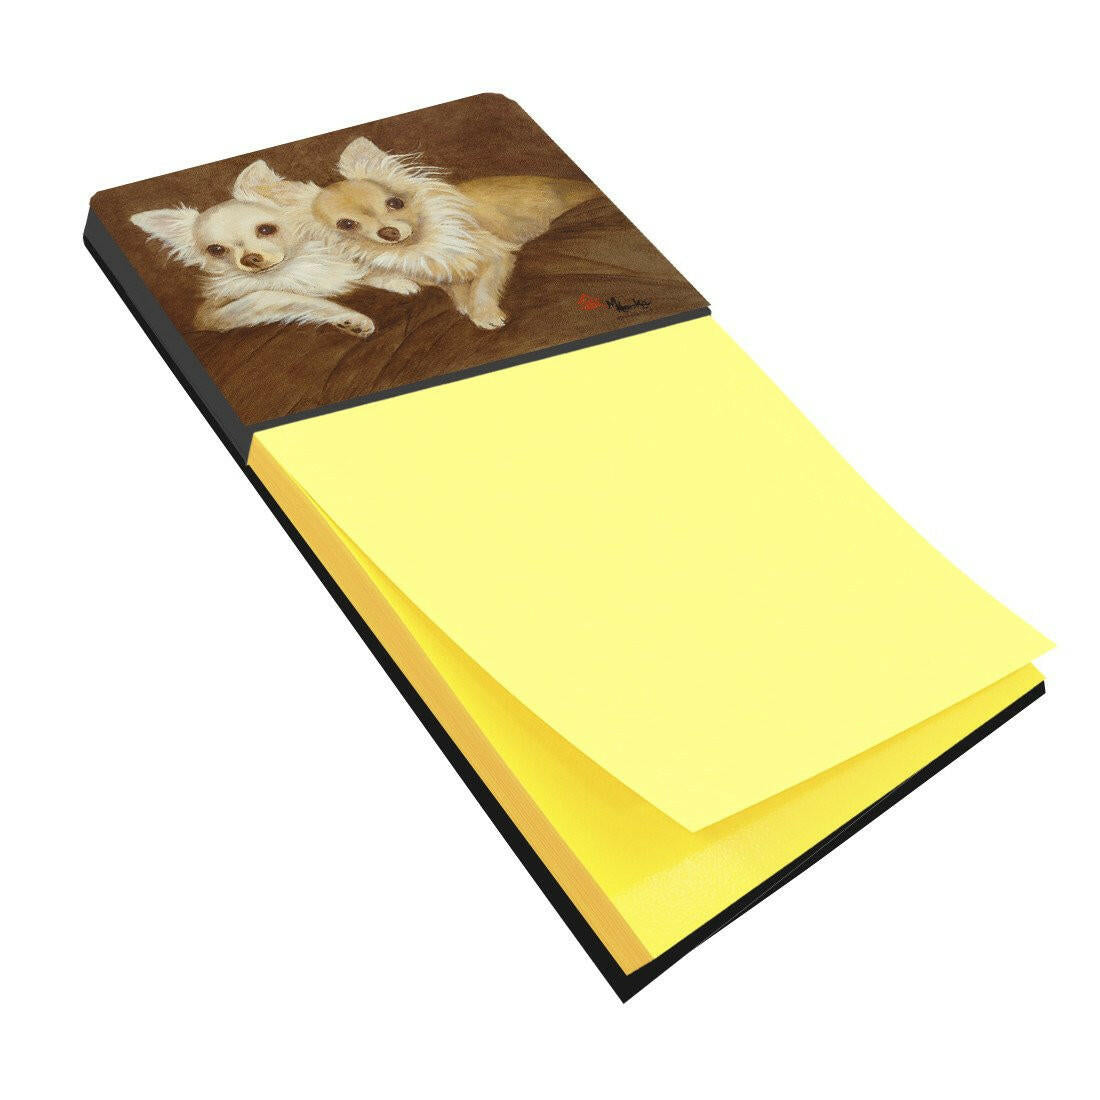 Chihuahua For the Pair Sticky Note Holder MH1042SN by Caroline's Treasures